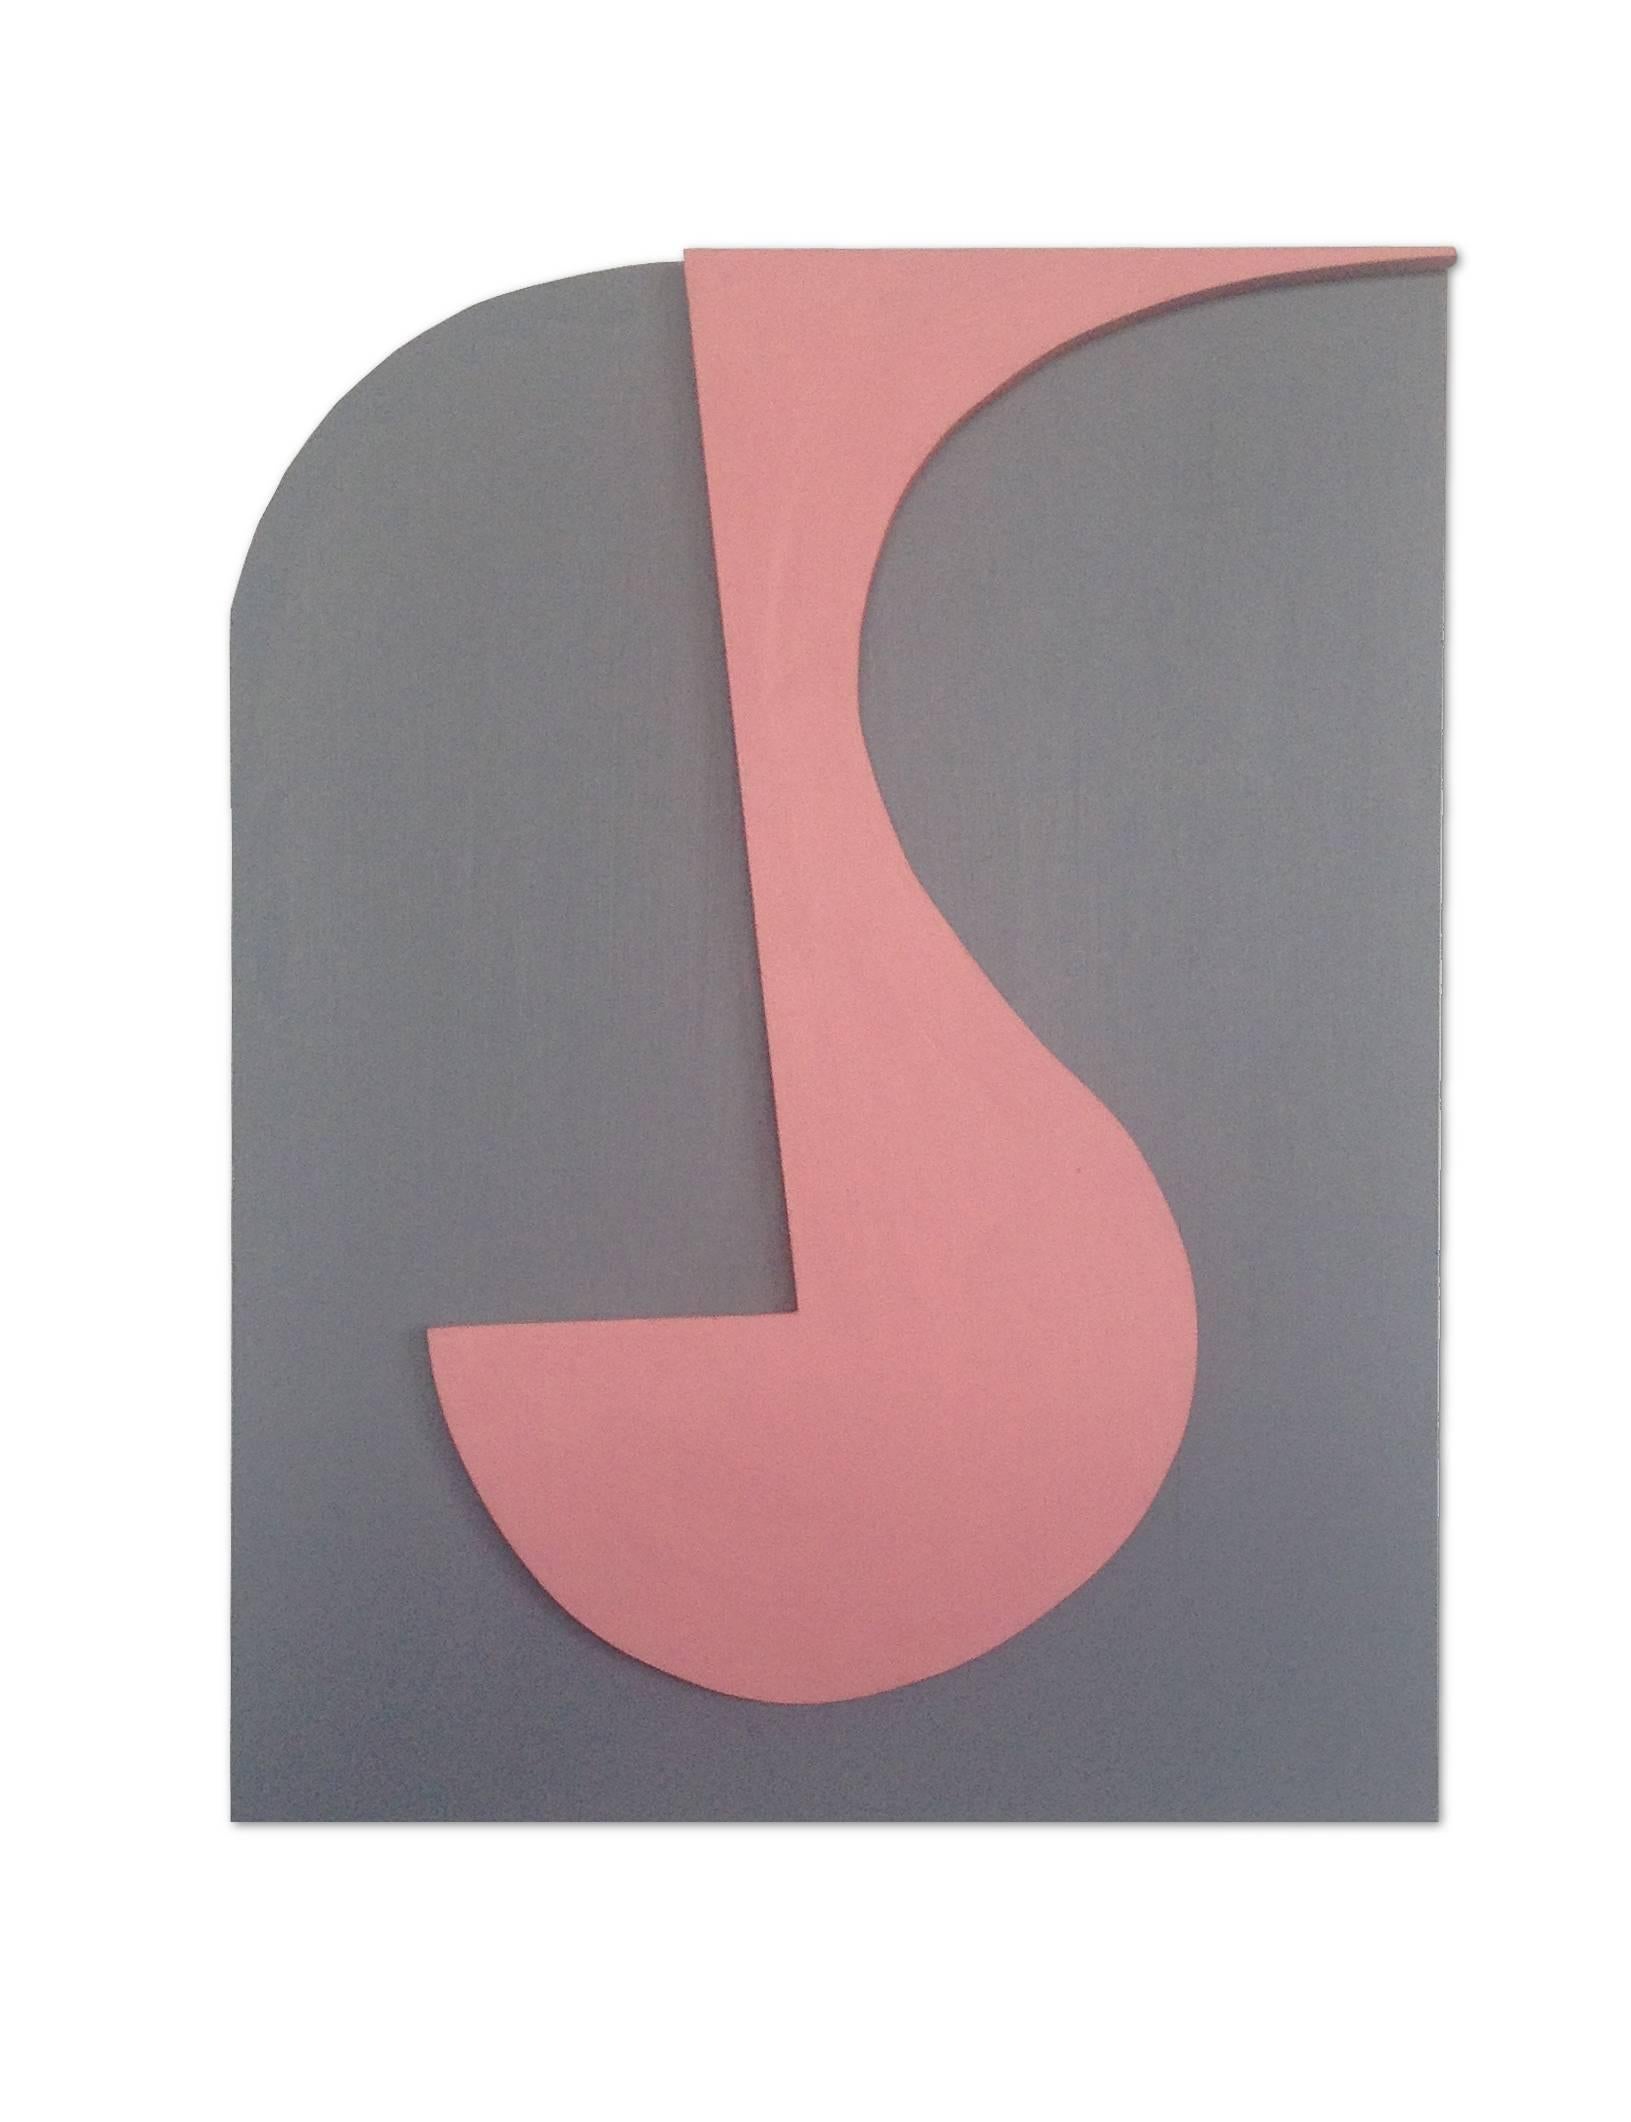 "The Conversation", a relationship between gray and pink - Mixed Media Art by Fred Bendheim